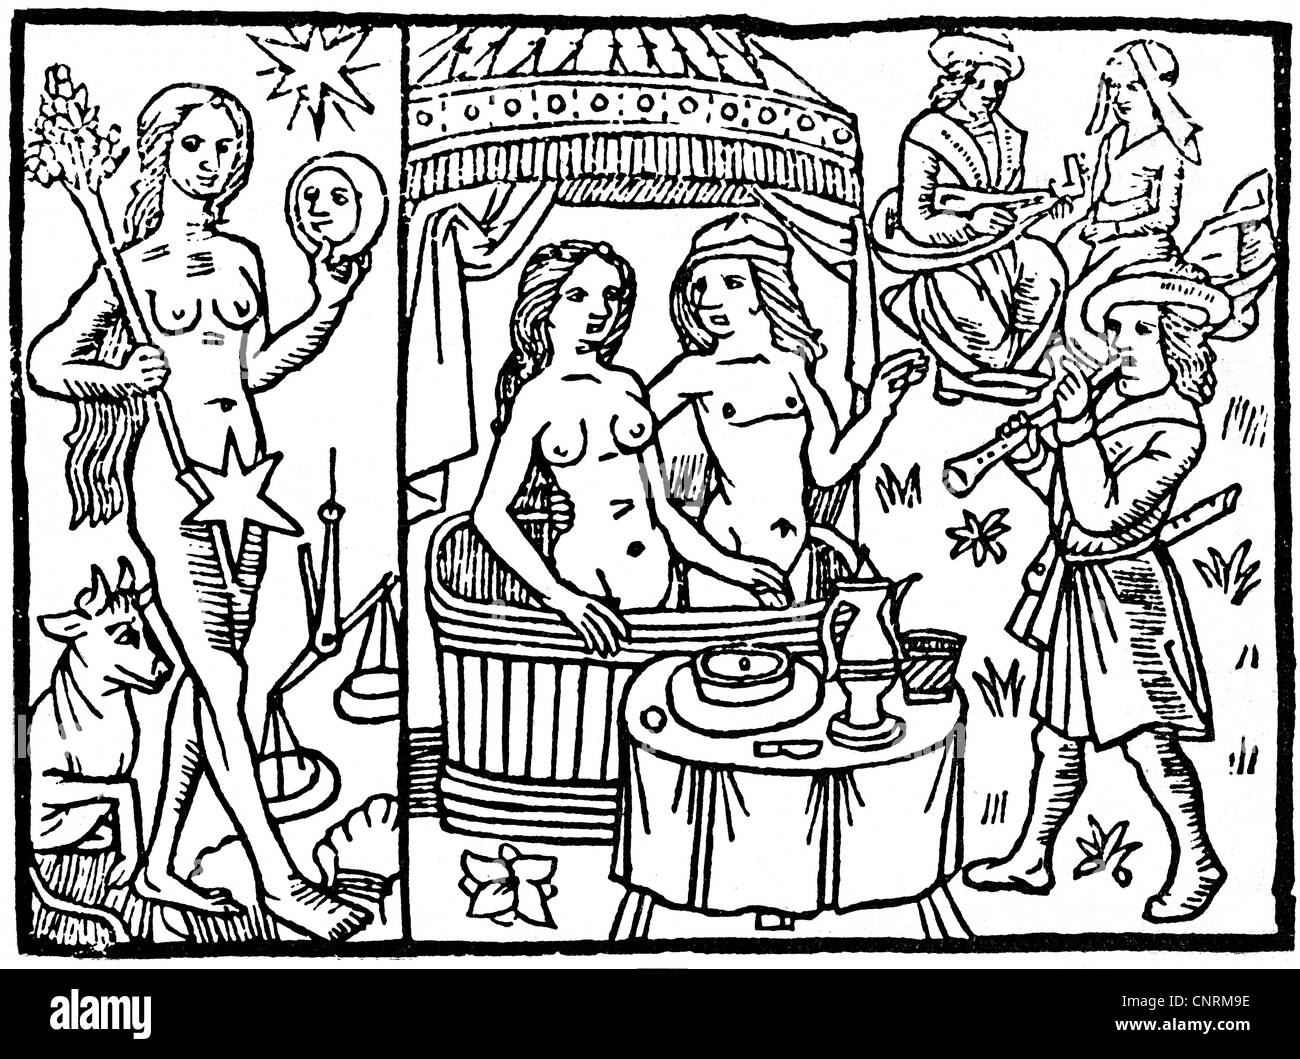 bathing, bath tub, couple taking a bath, woodcut, circa 1500, Additional-Rights-Clearences-Not Available Stock Photo